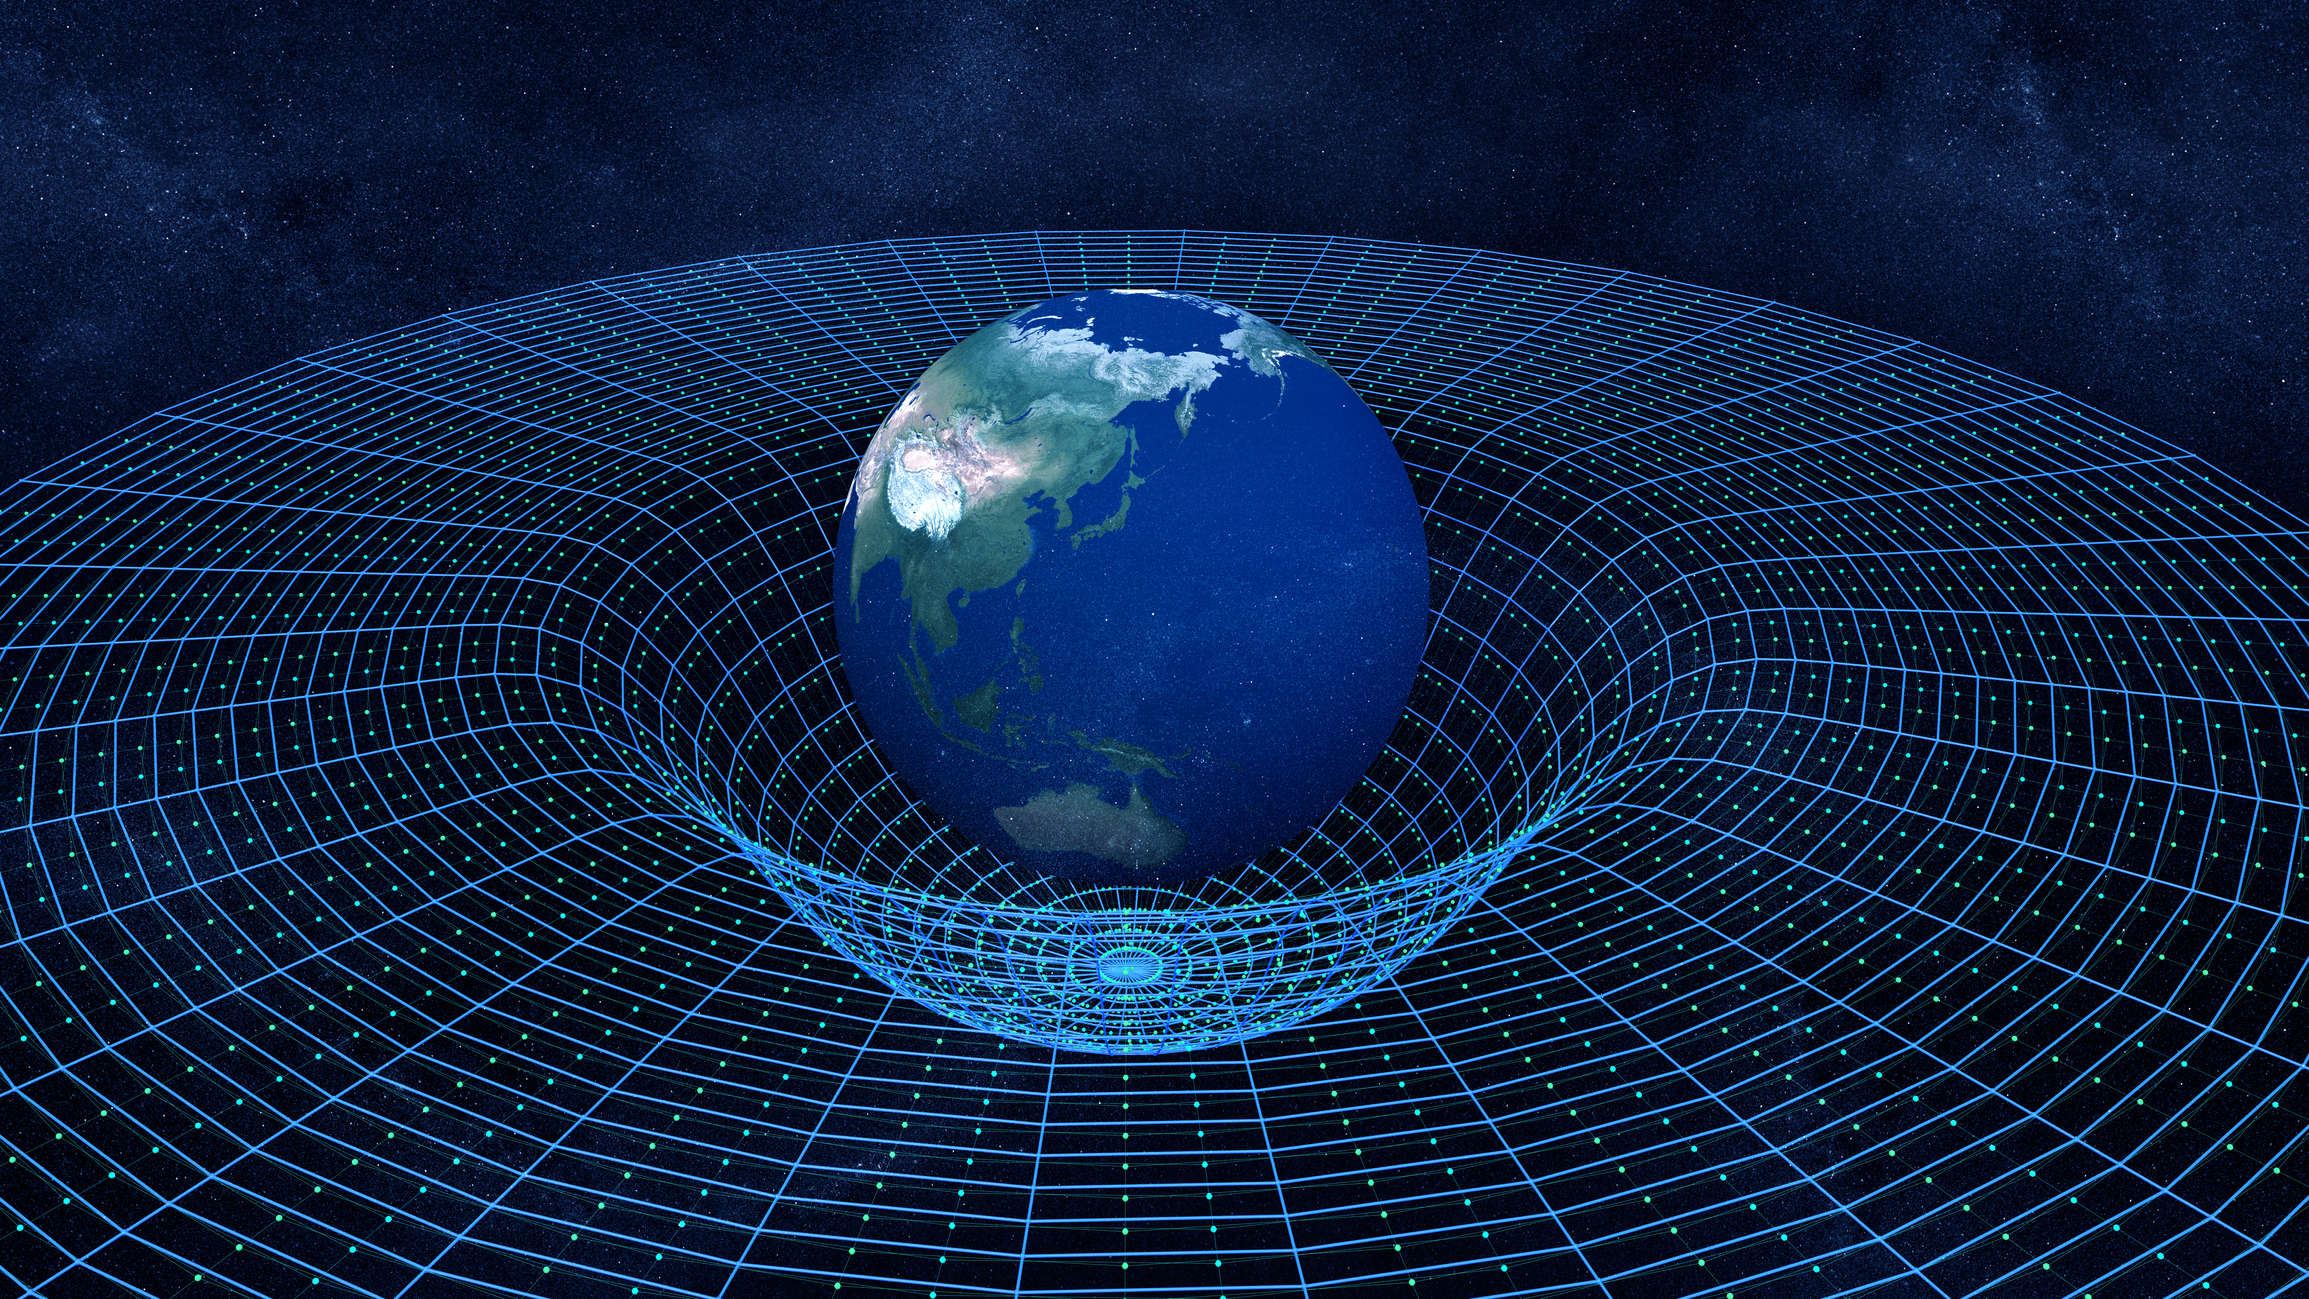 Gravity bends light, space and time. Here's how